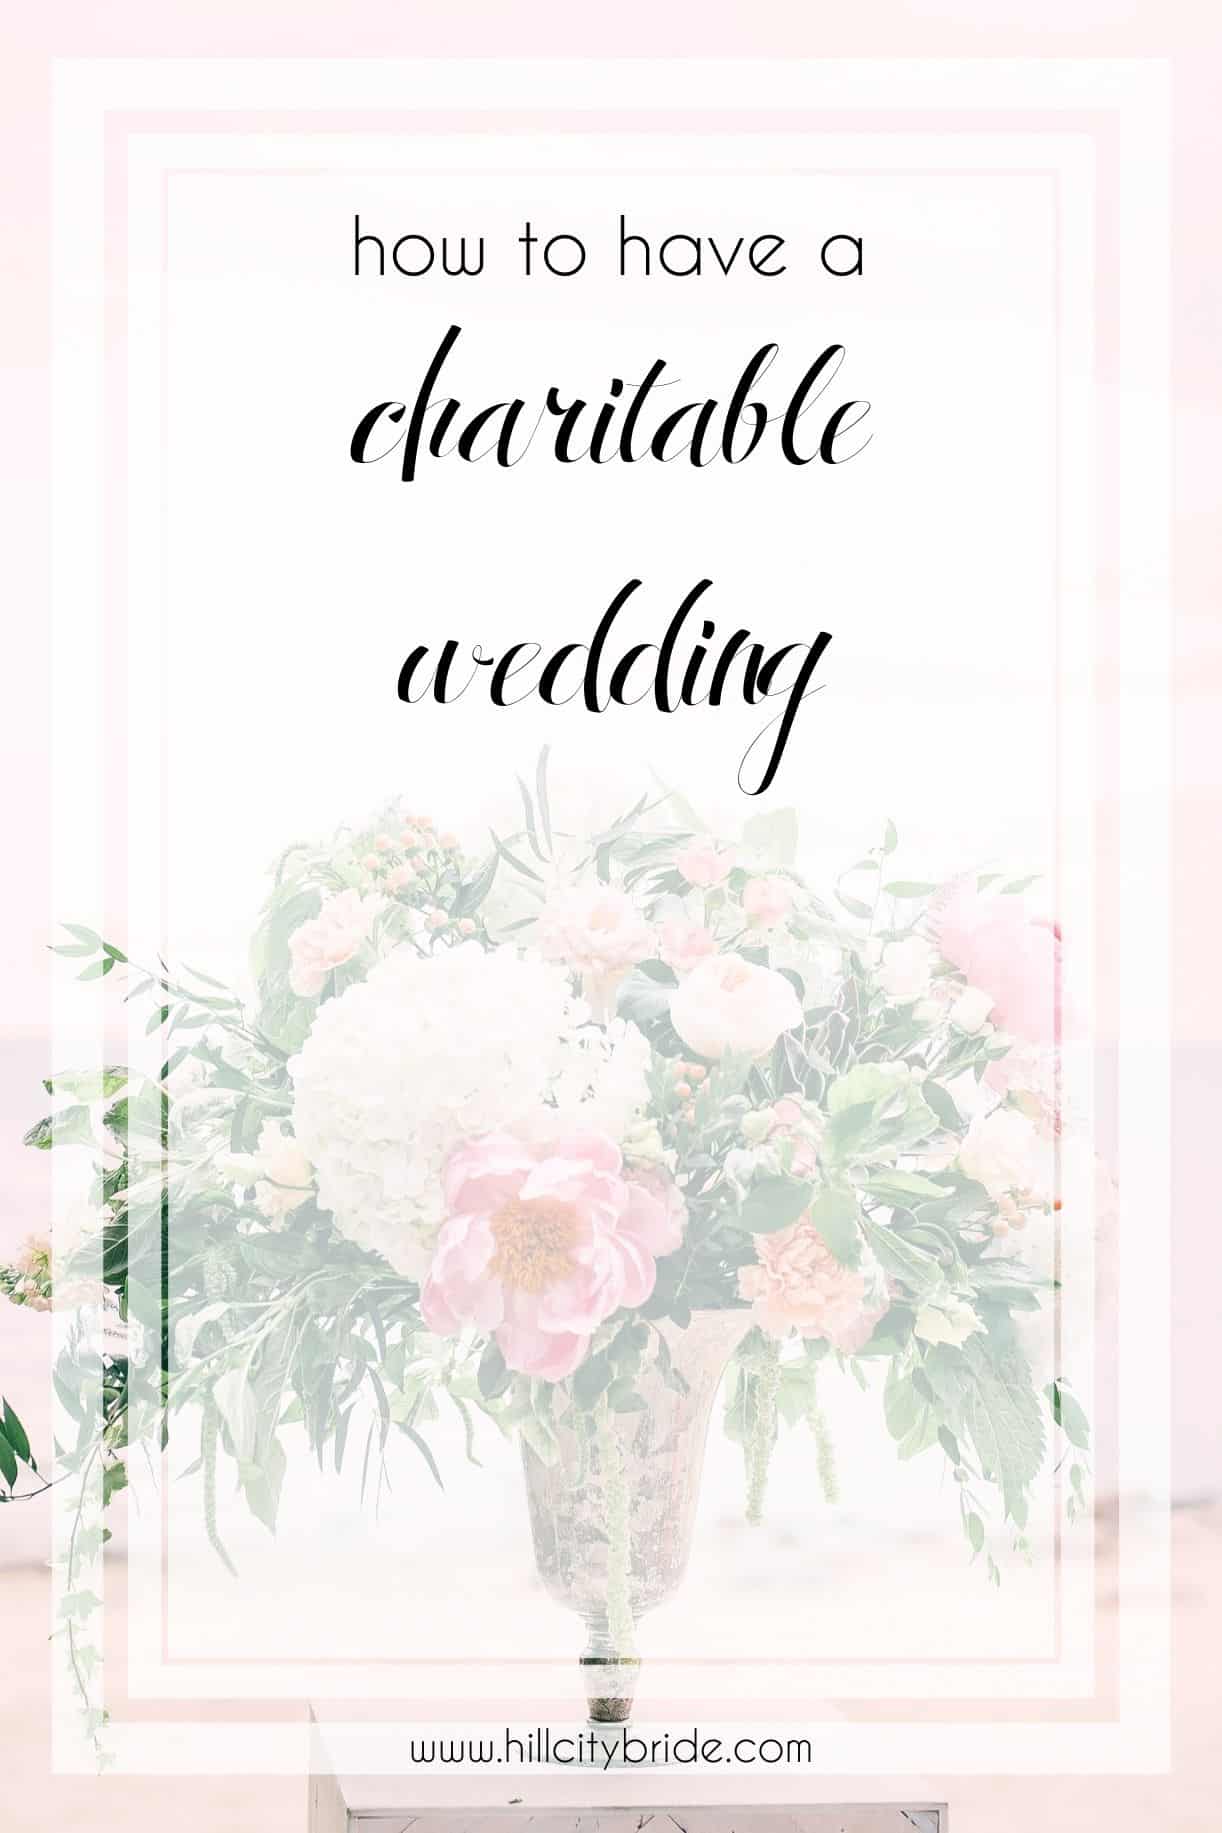 How to Have a Charitable Wedding | Hill City Bride Virginia Weddings | Give Back Wedding Donations